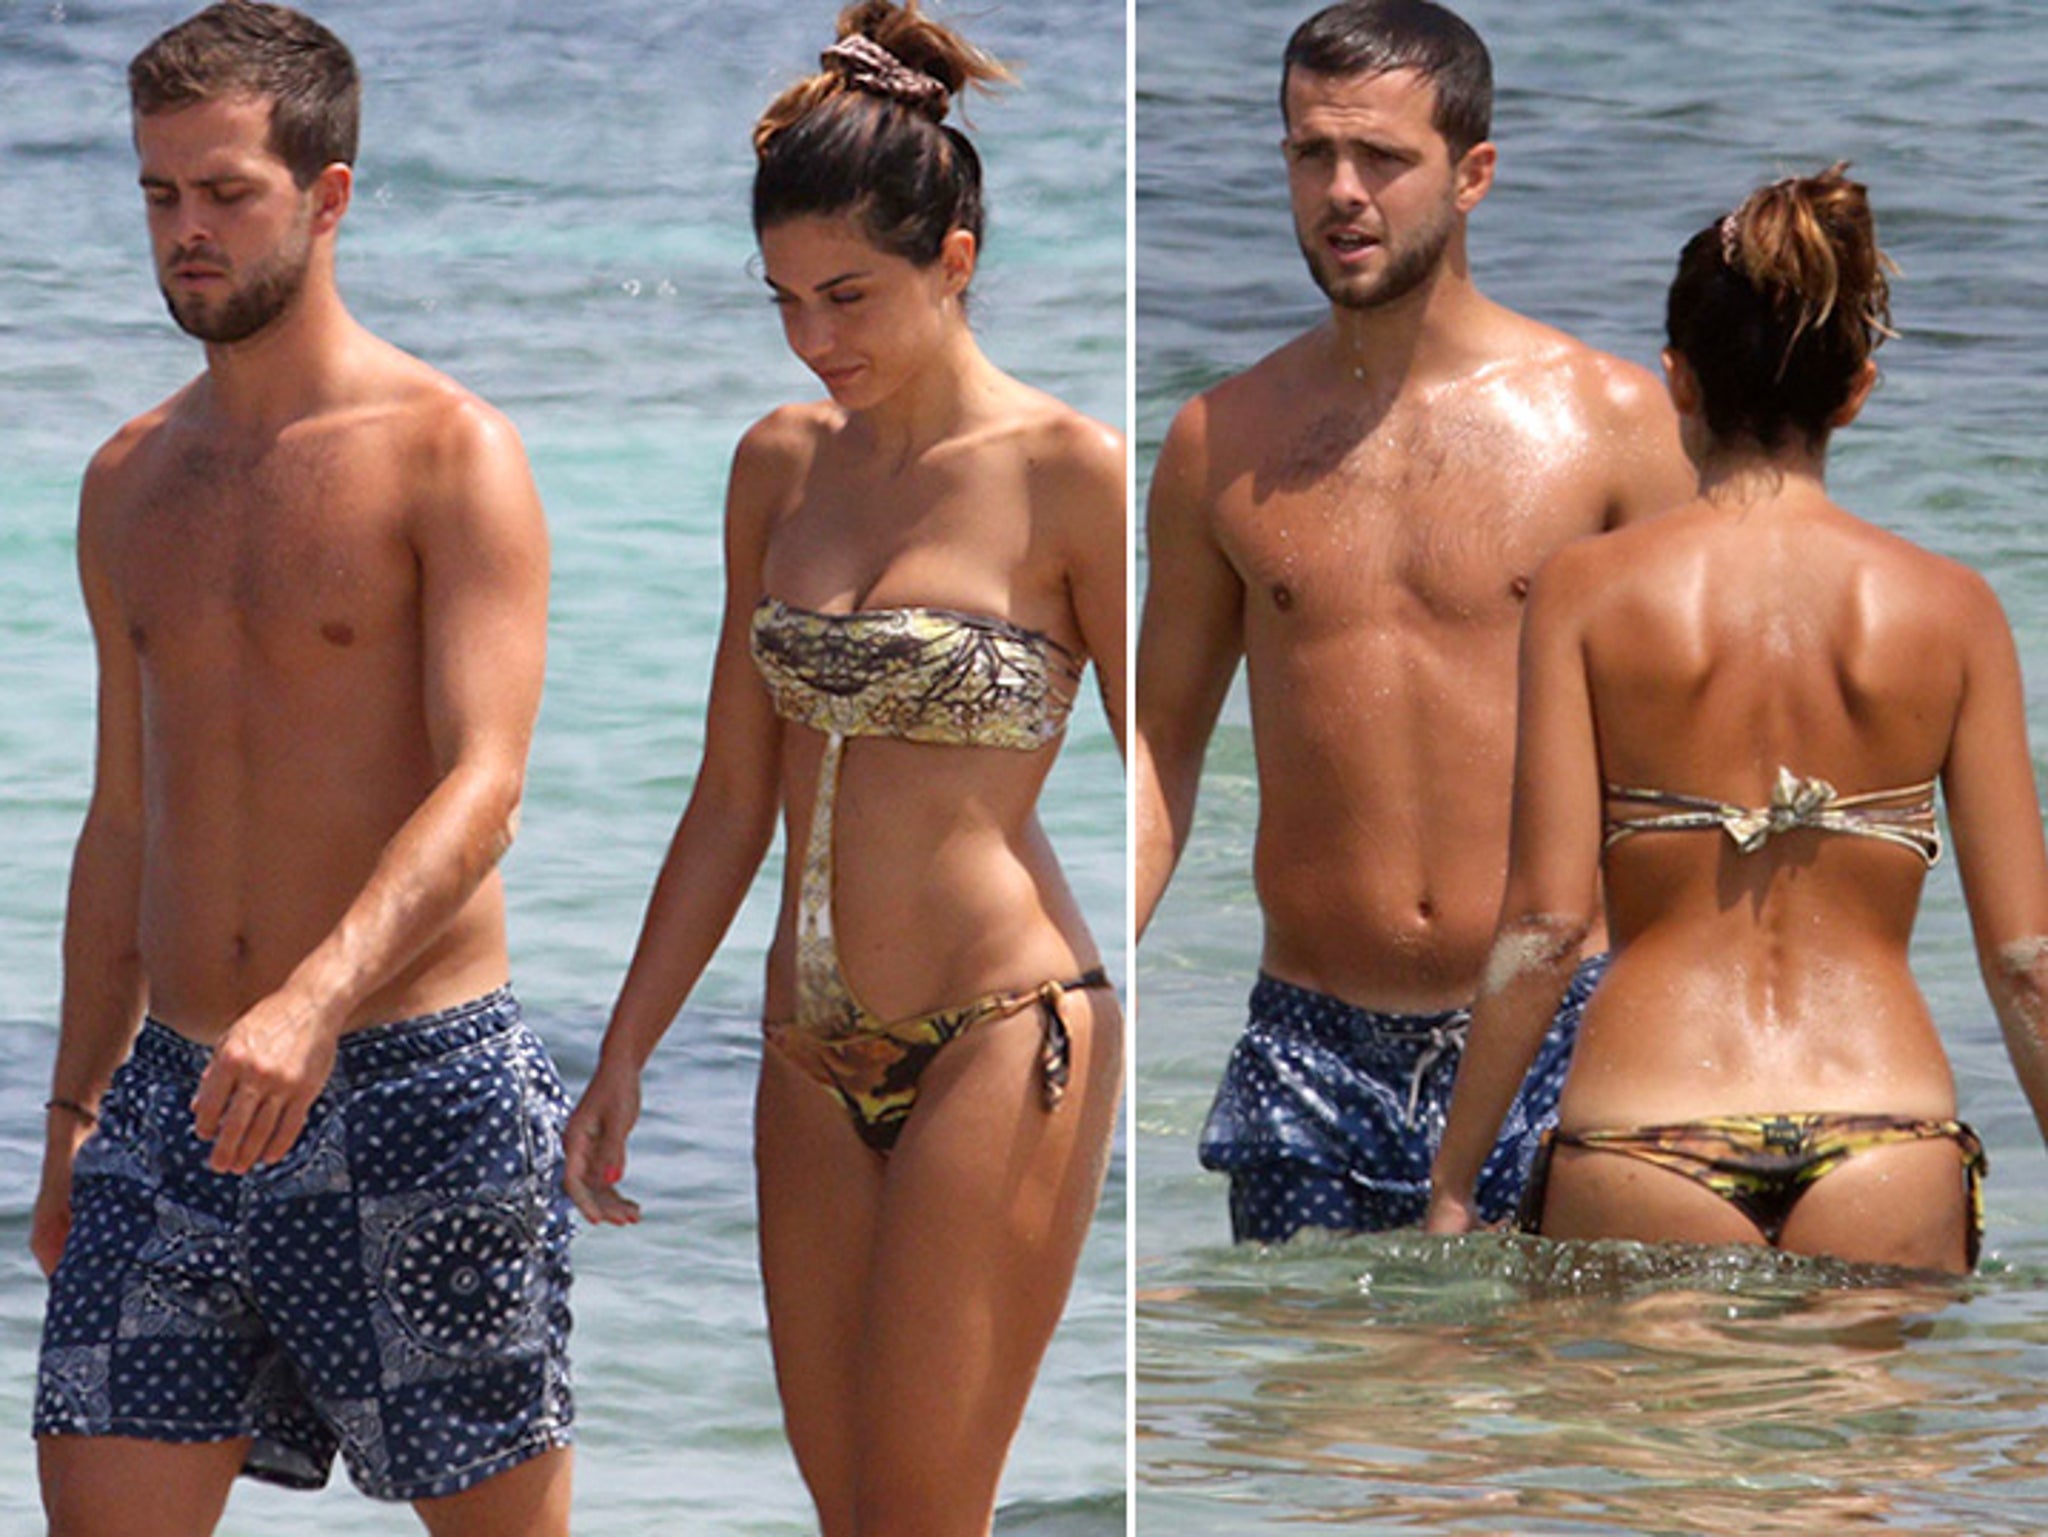 Soccer Superstar Miralem Pjanic's Hot Wife Thongs Out In Ibiza